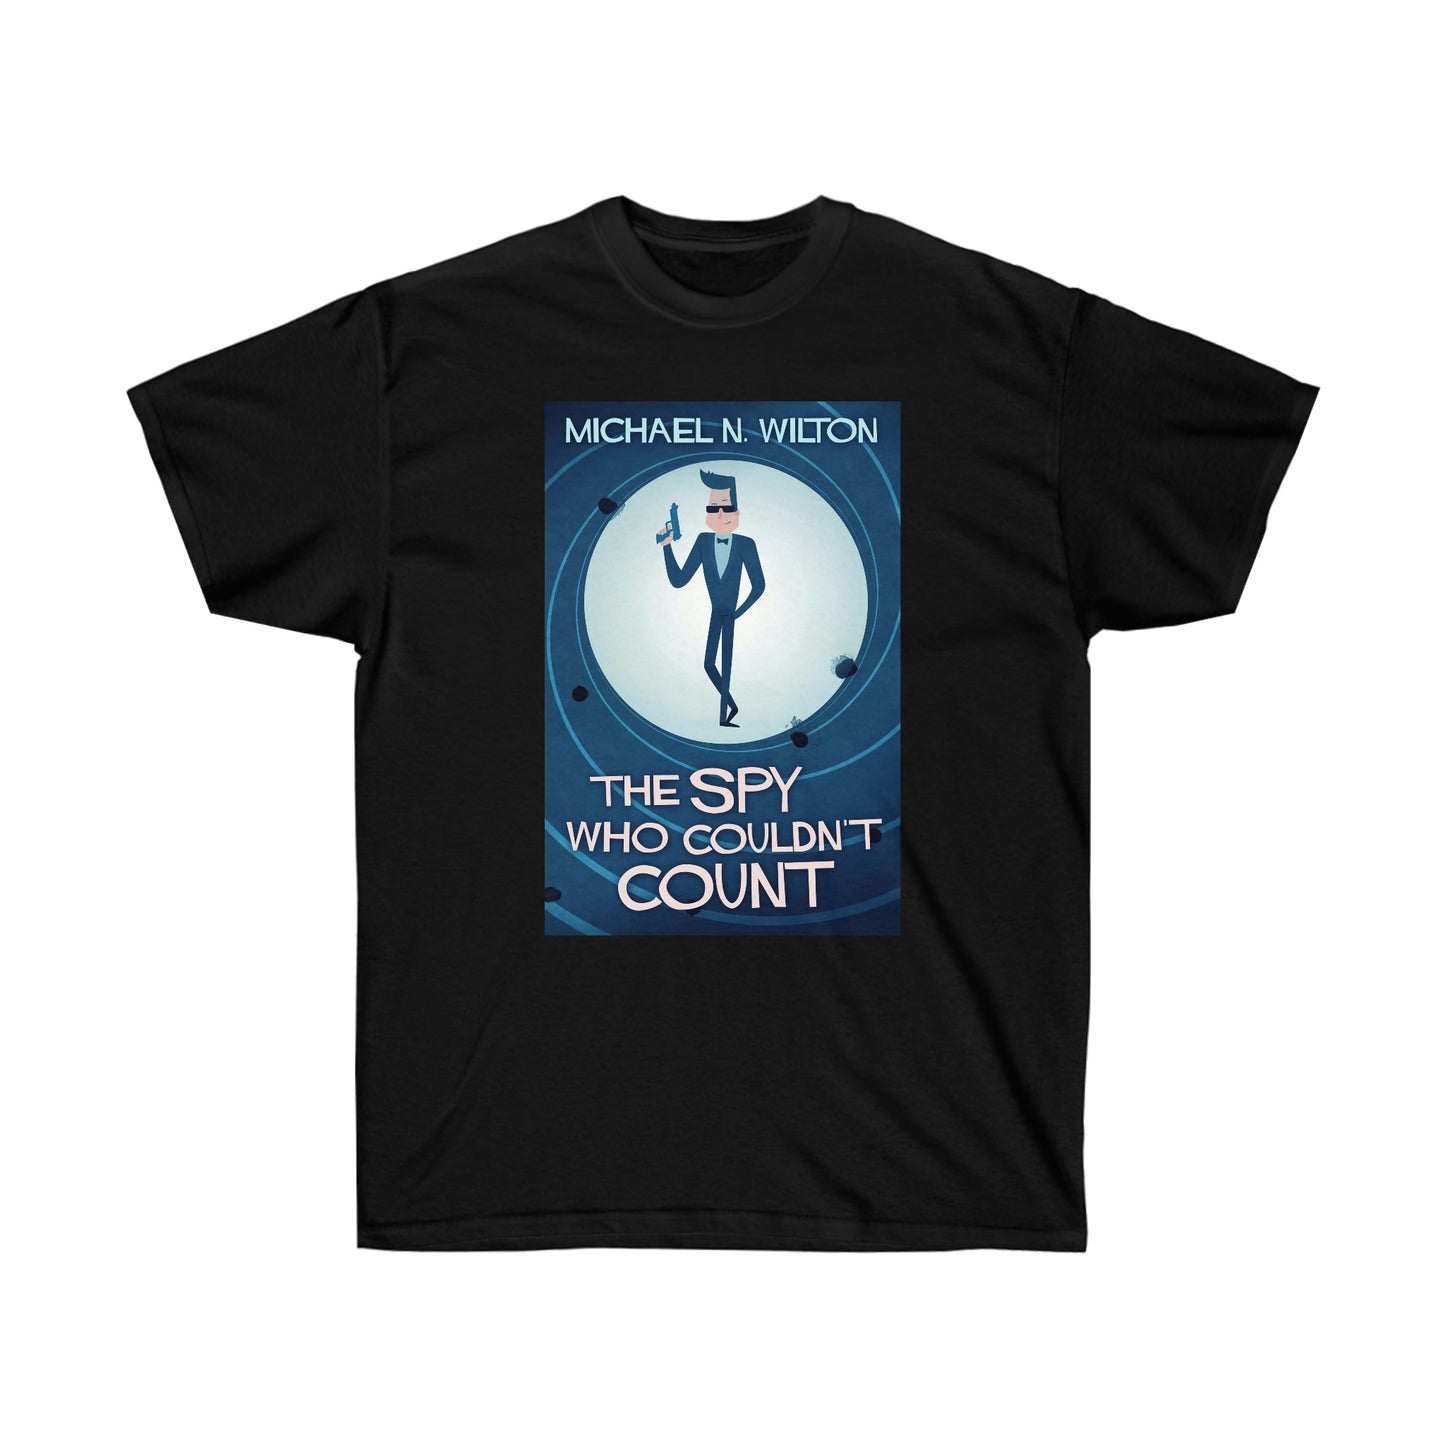 The Spy Who Couldn't Count - Unisex T-Shirt